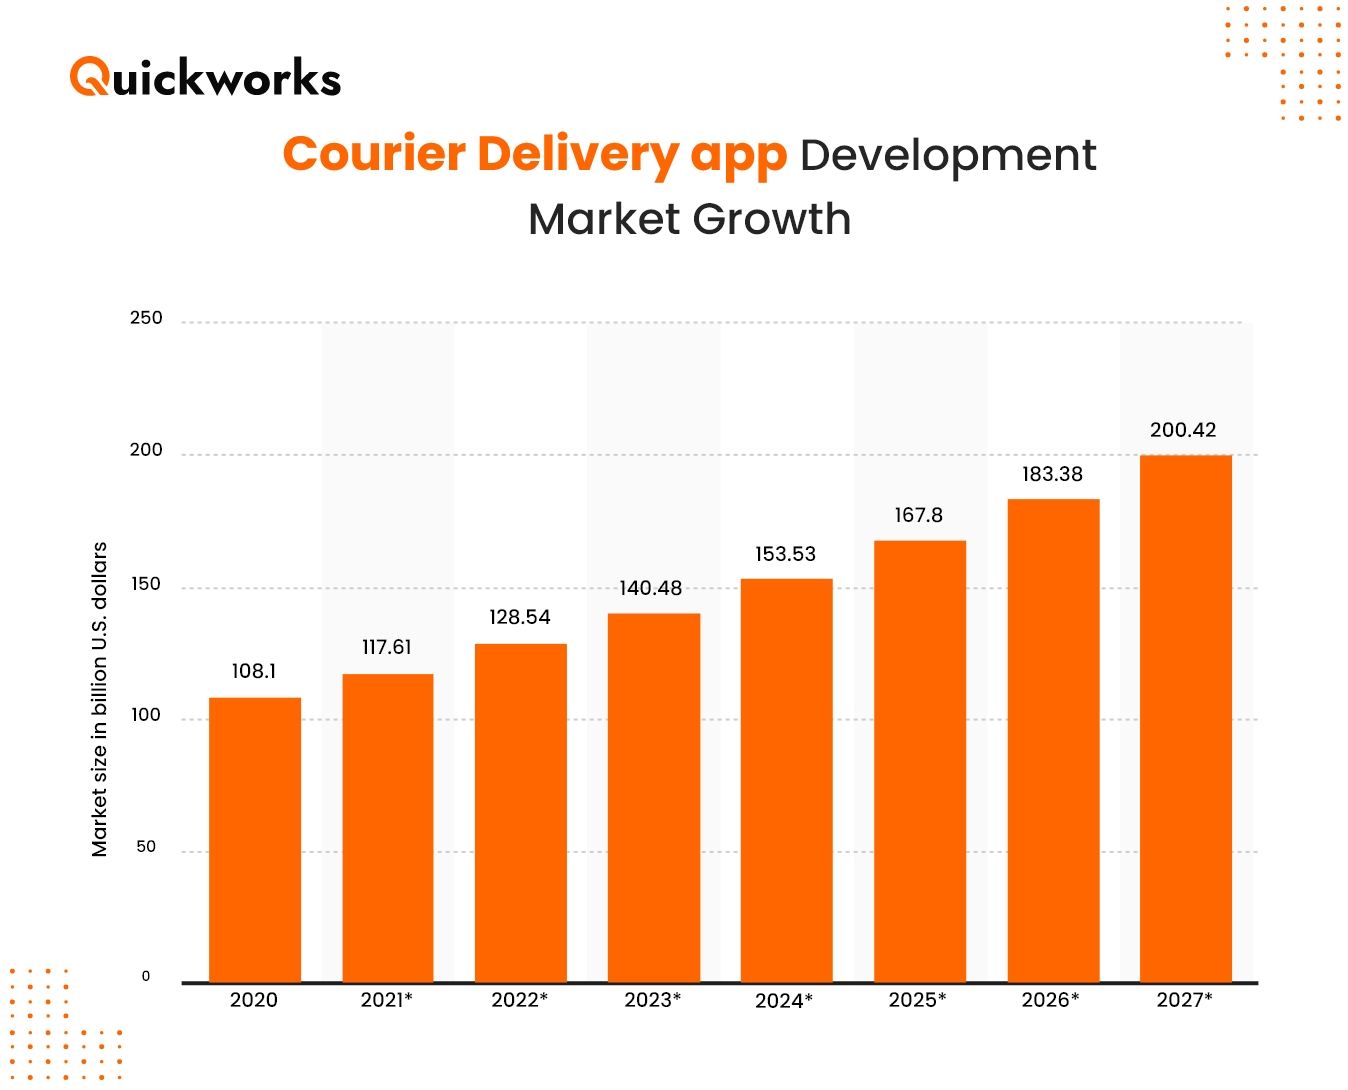 Courier Delivery Software Trends